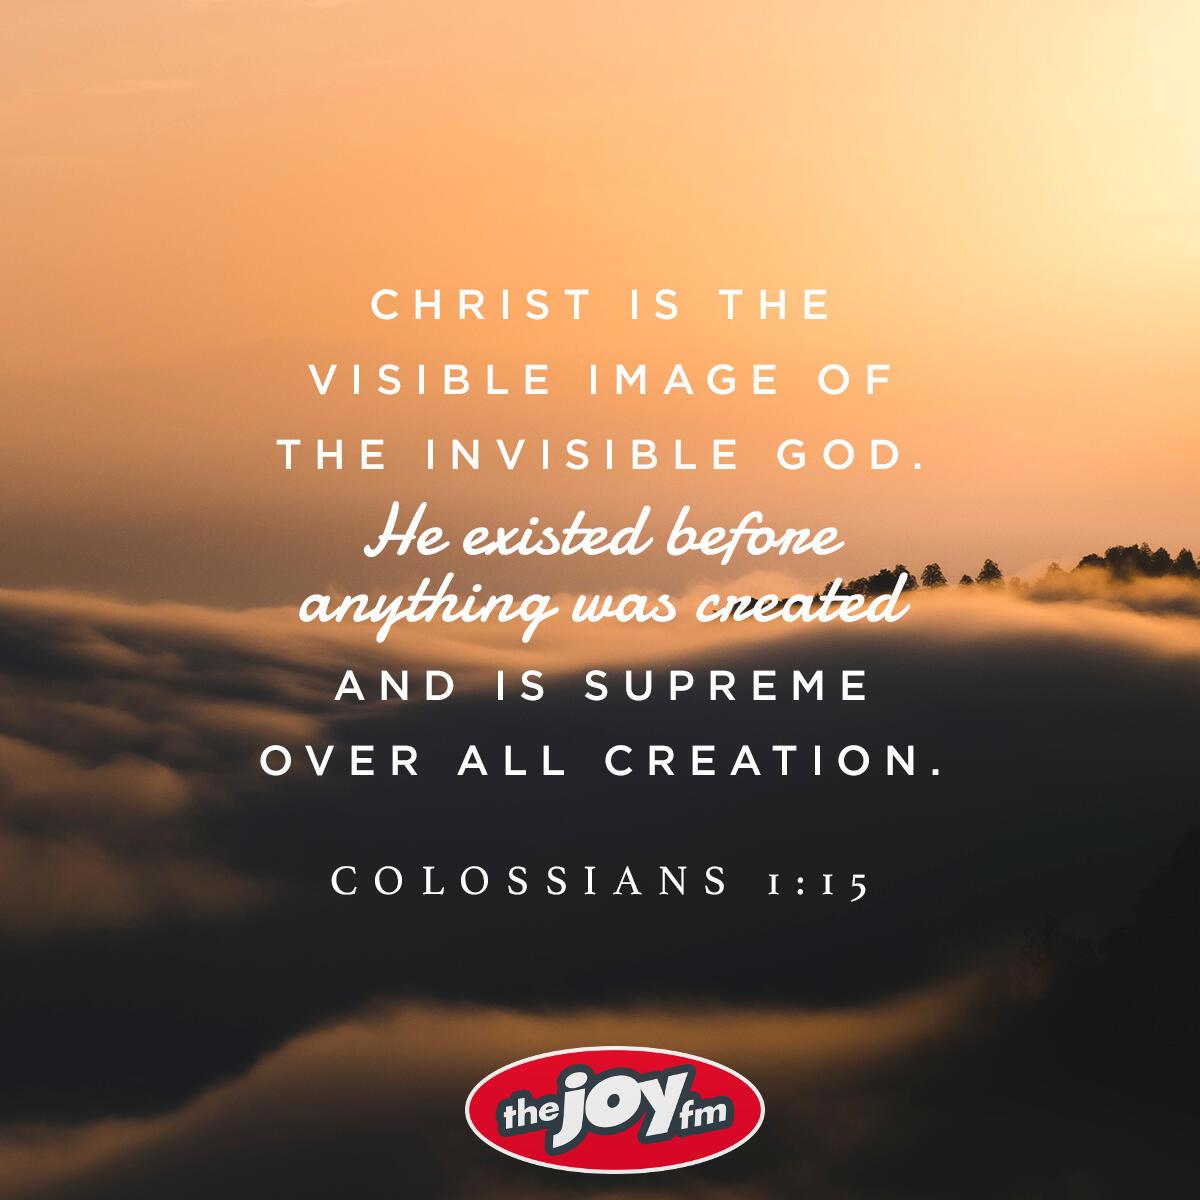 Colossians 1:15 - Verse of the Day